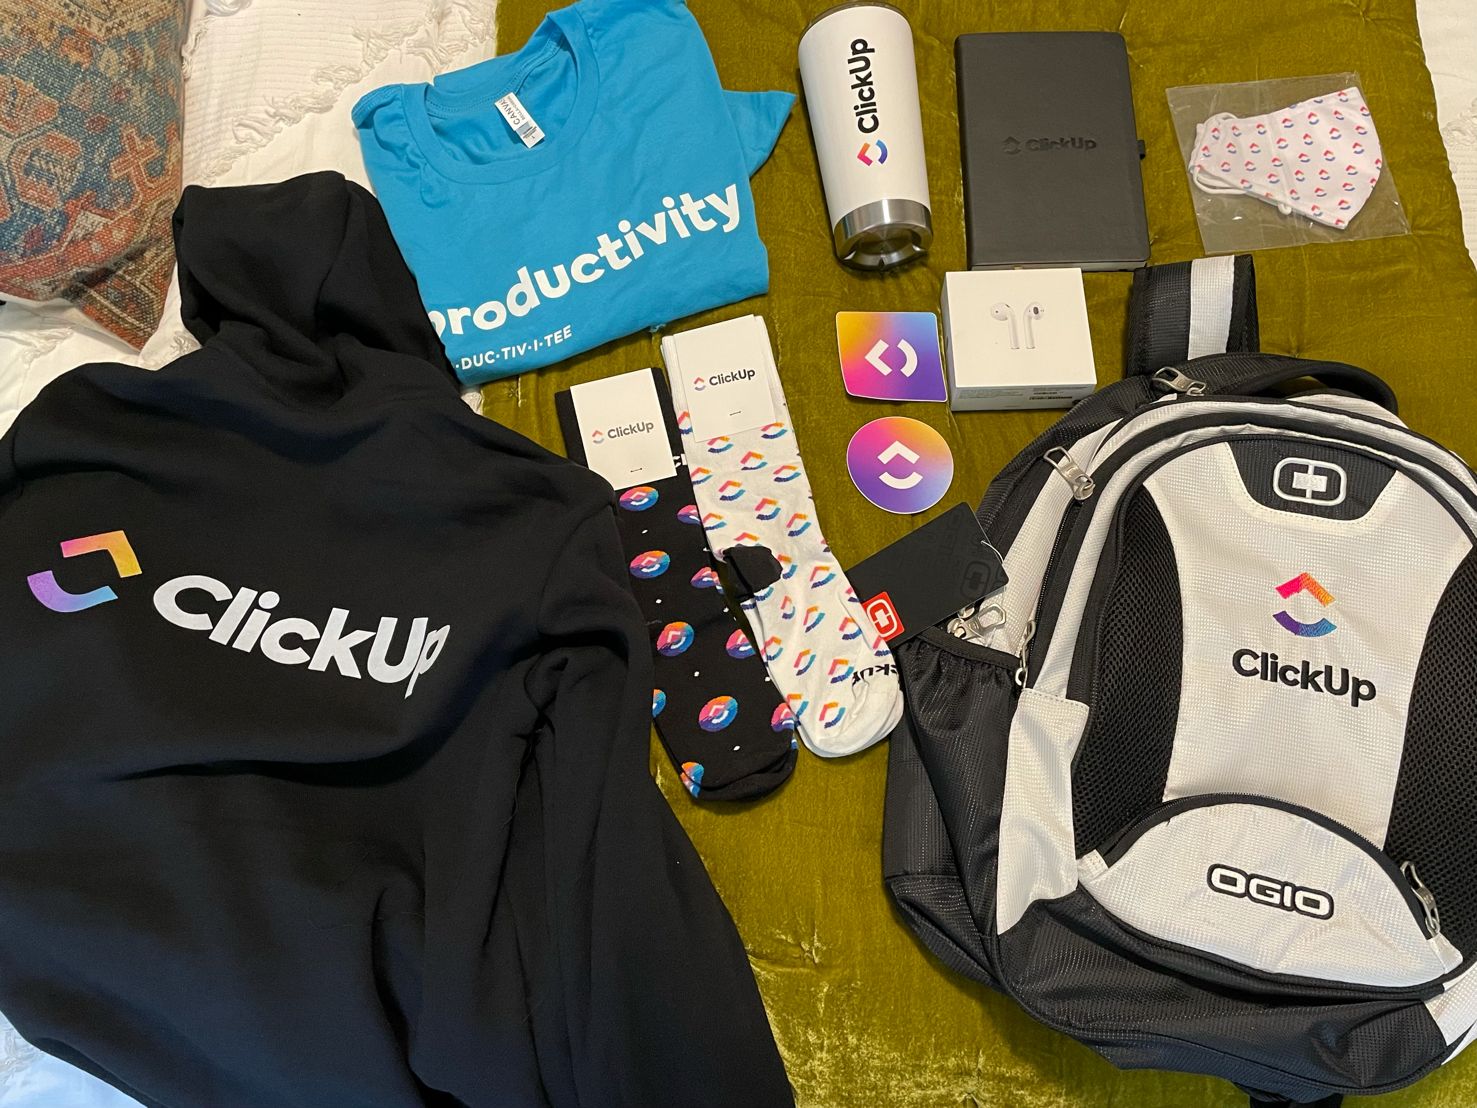 How to Create Company Swag People Actually Want to Wear